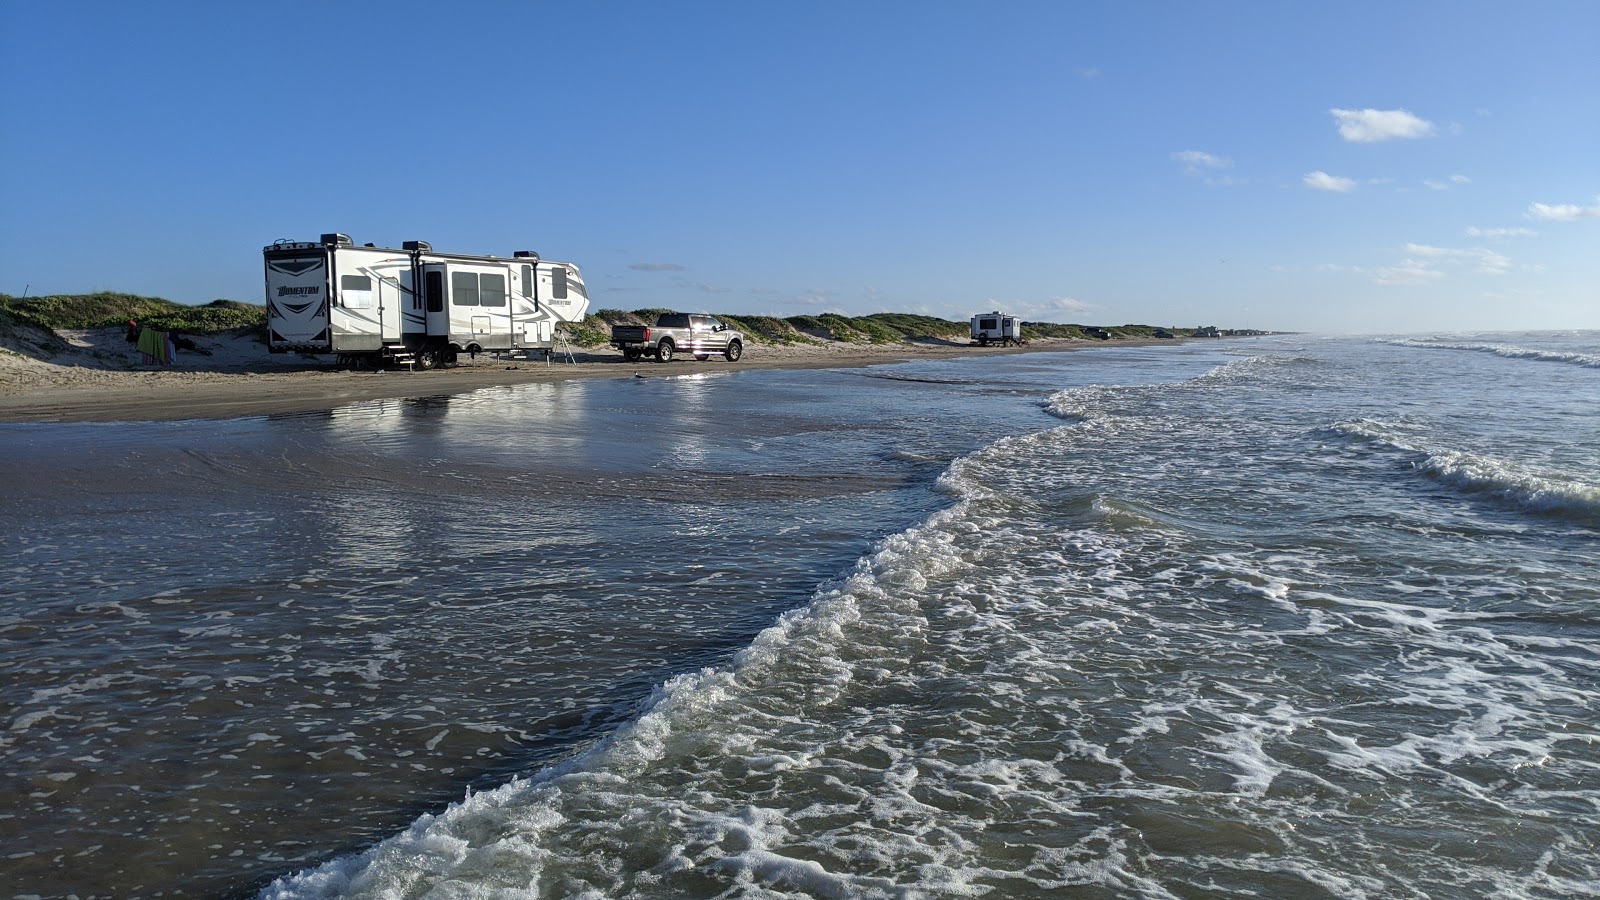 Photo of North beach Camping - popular place among relax connoisseurs